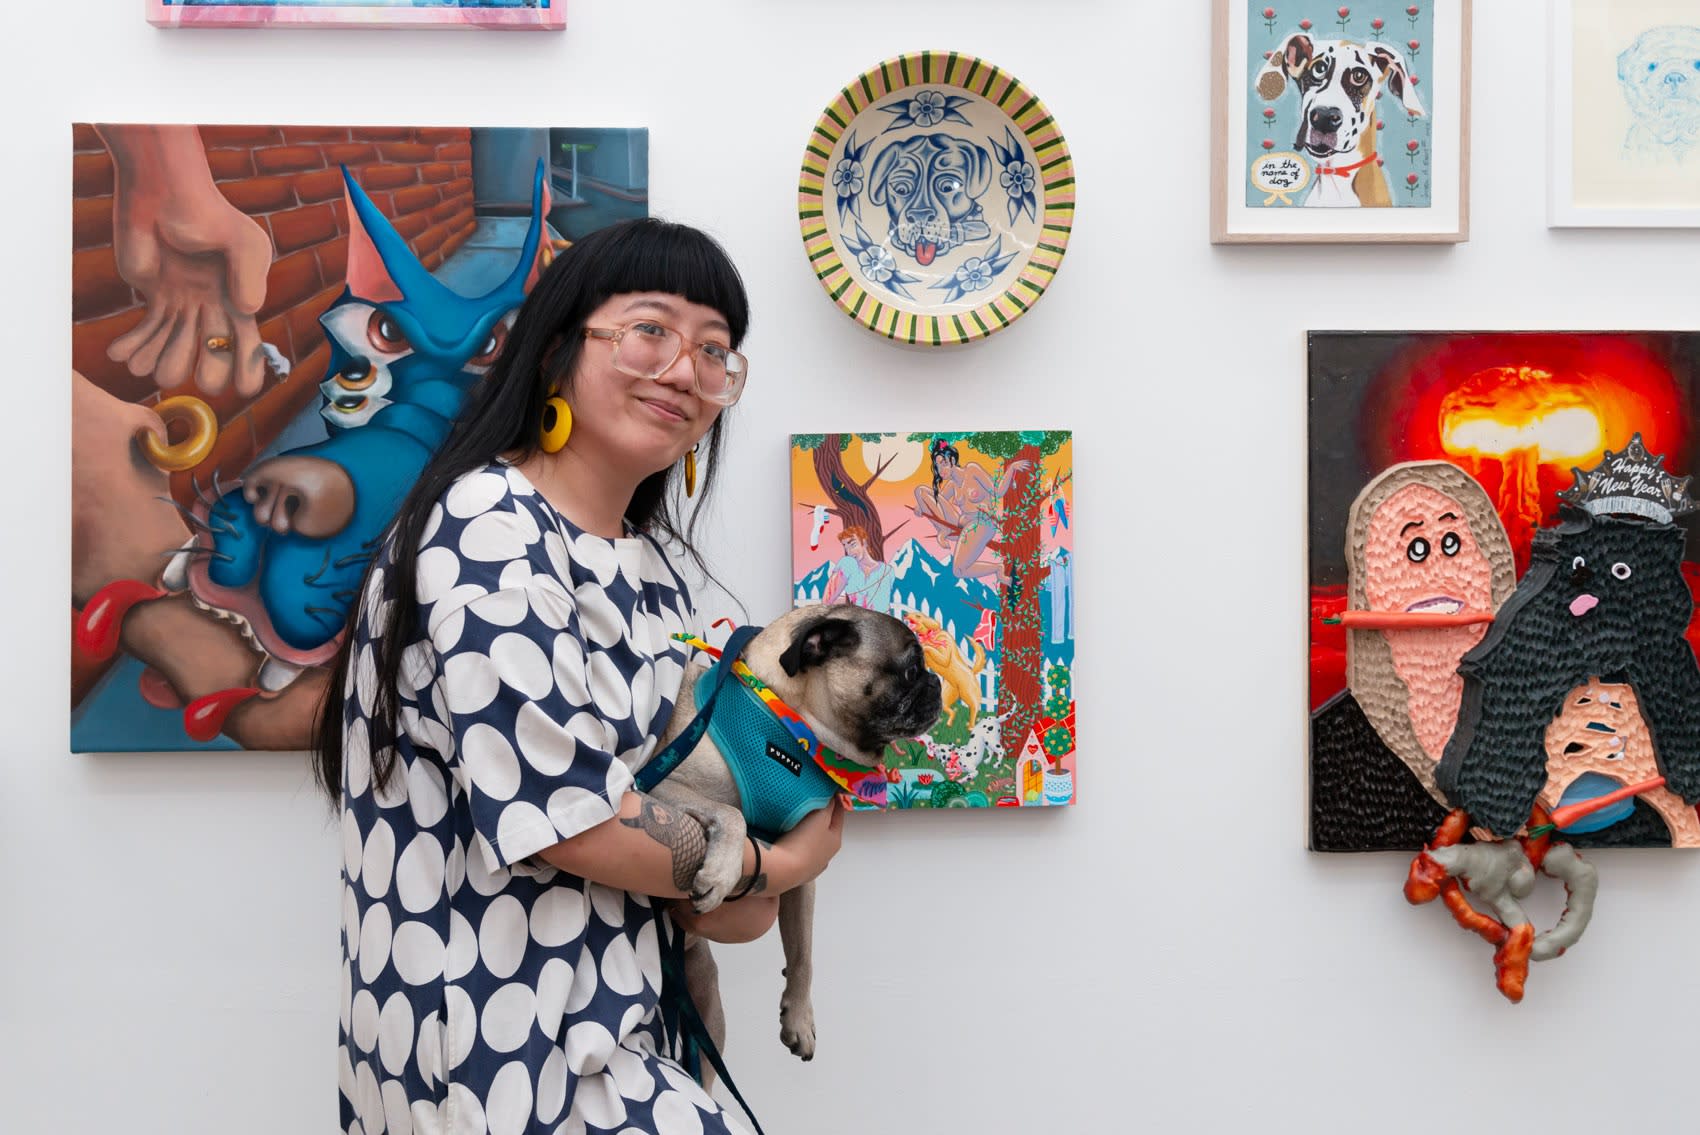 Artist Kristen Liu Wong with her pug in front of a wall of artworks